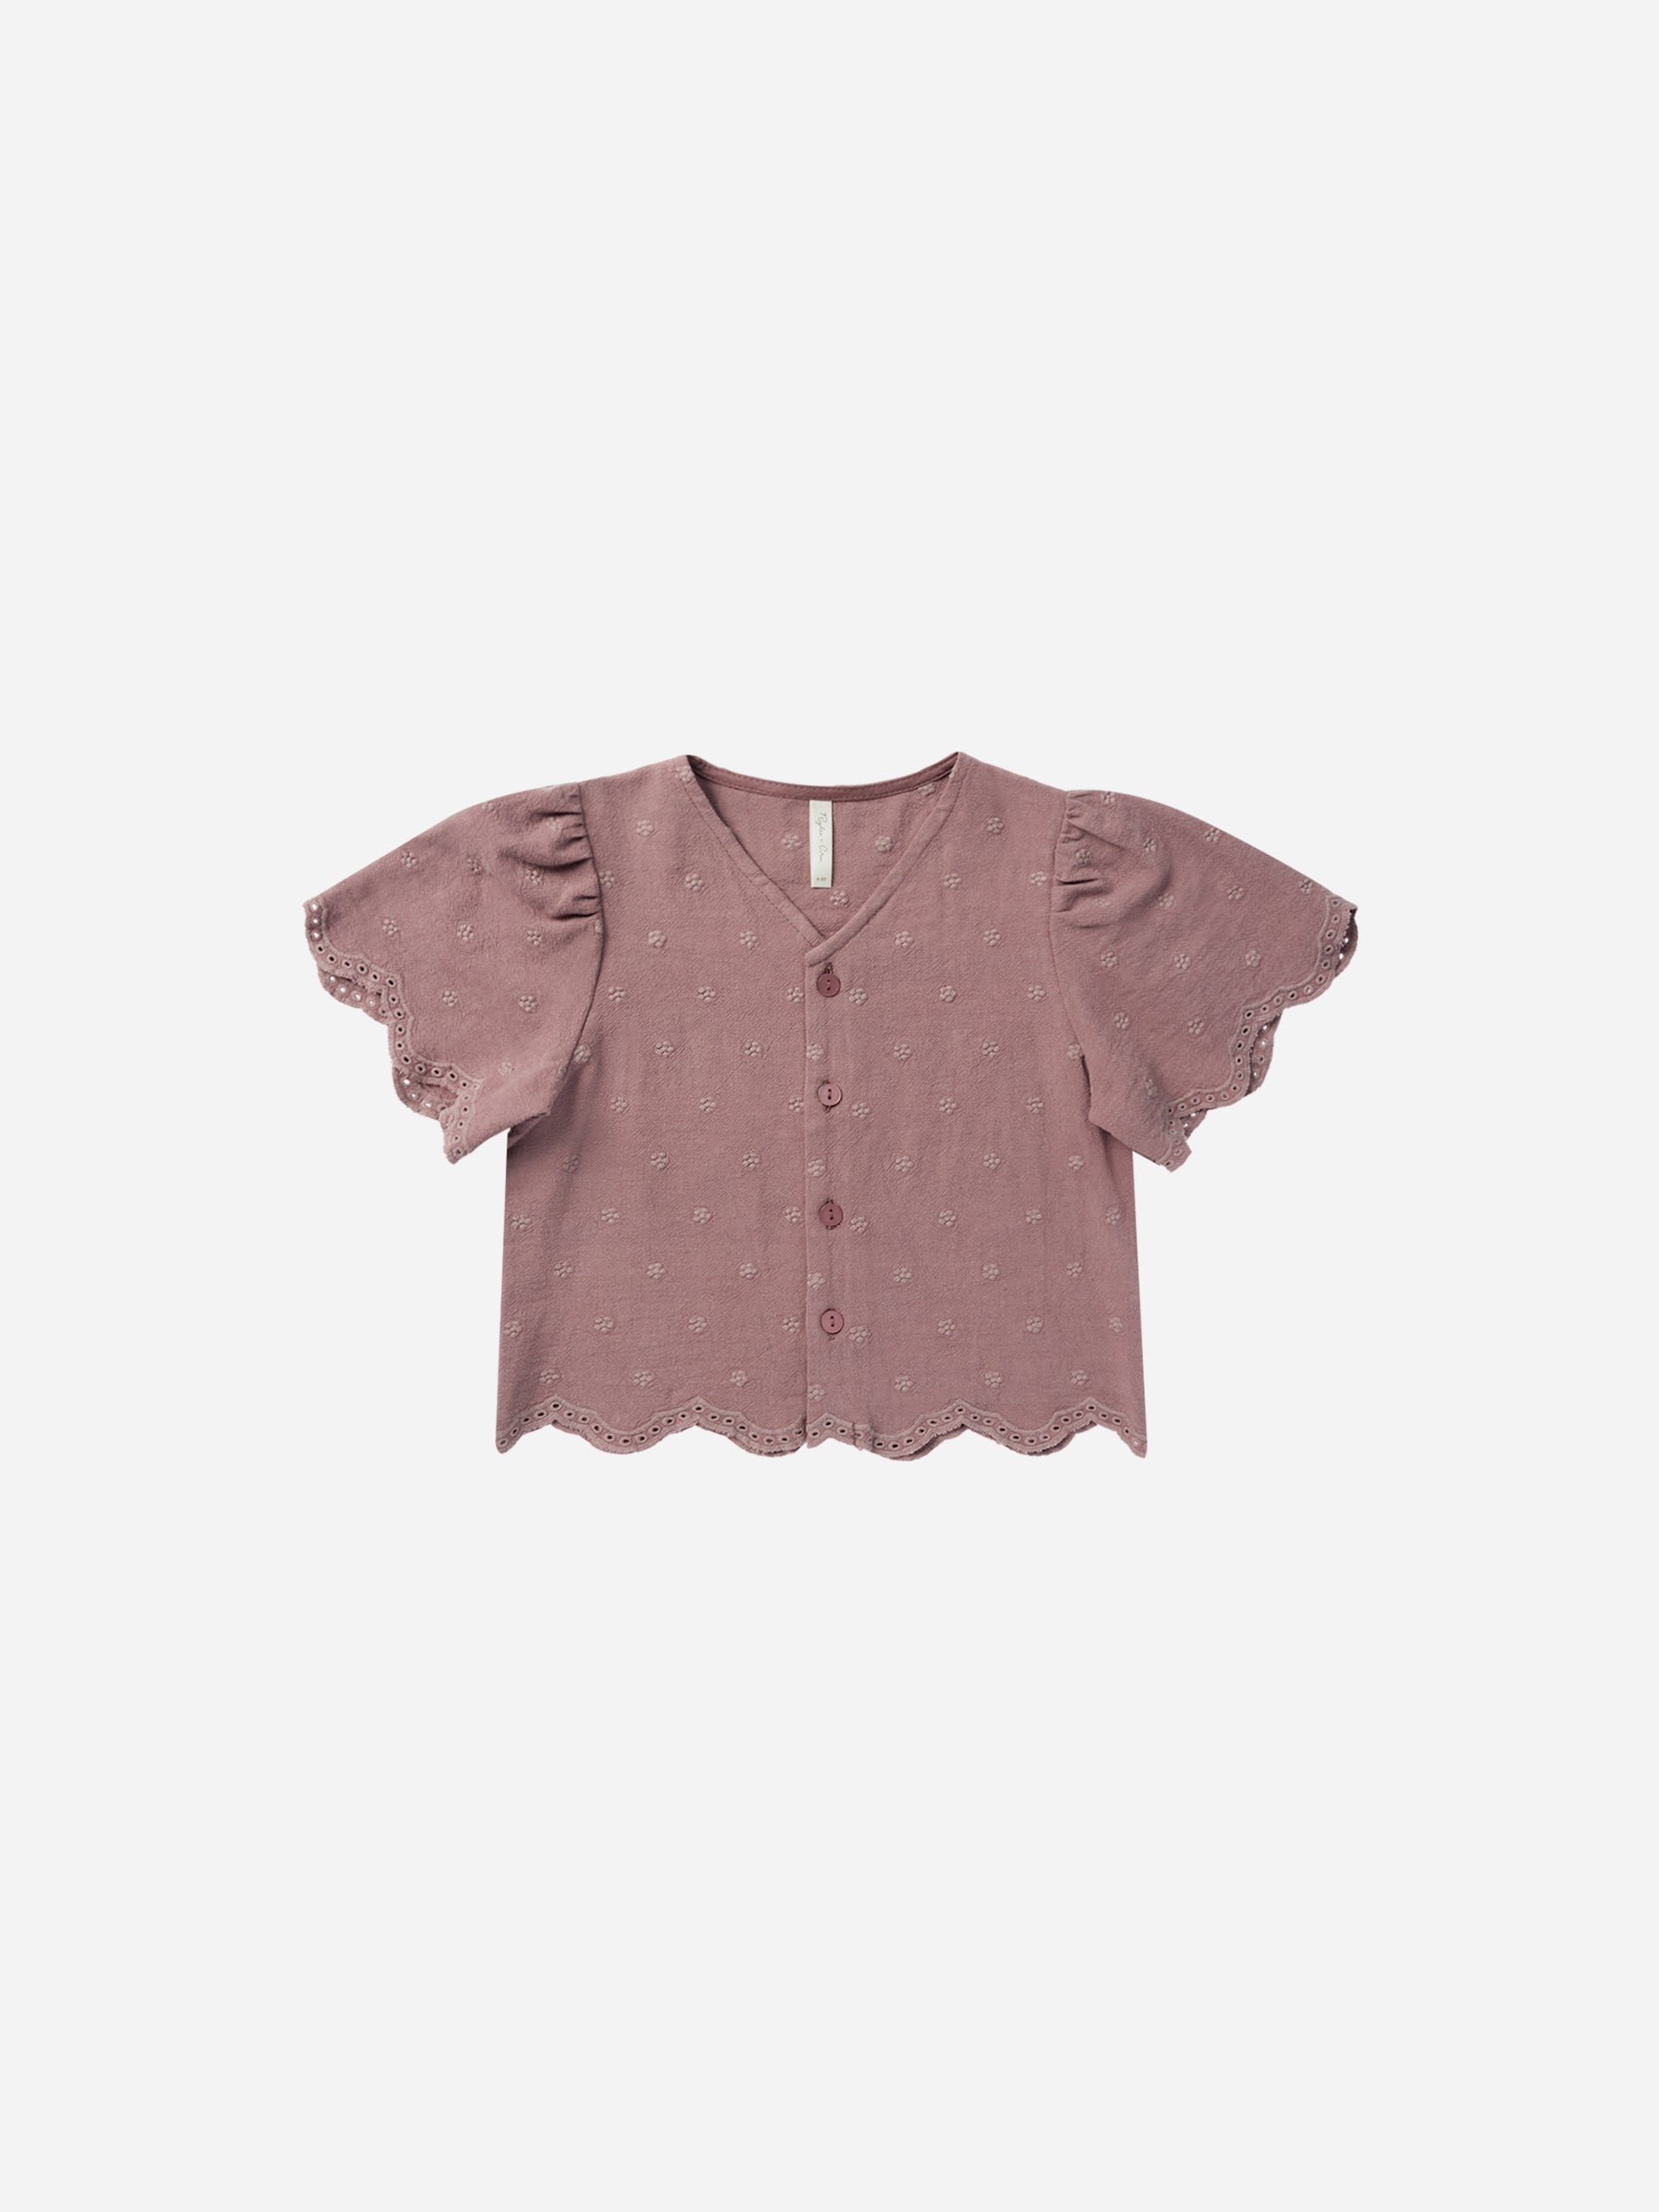 Cleo Top || Mulberry Daisy - Rylee + Cru | Kids Clothes | Trendy Baby Clothes | Modern Infant Outfits |